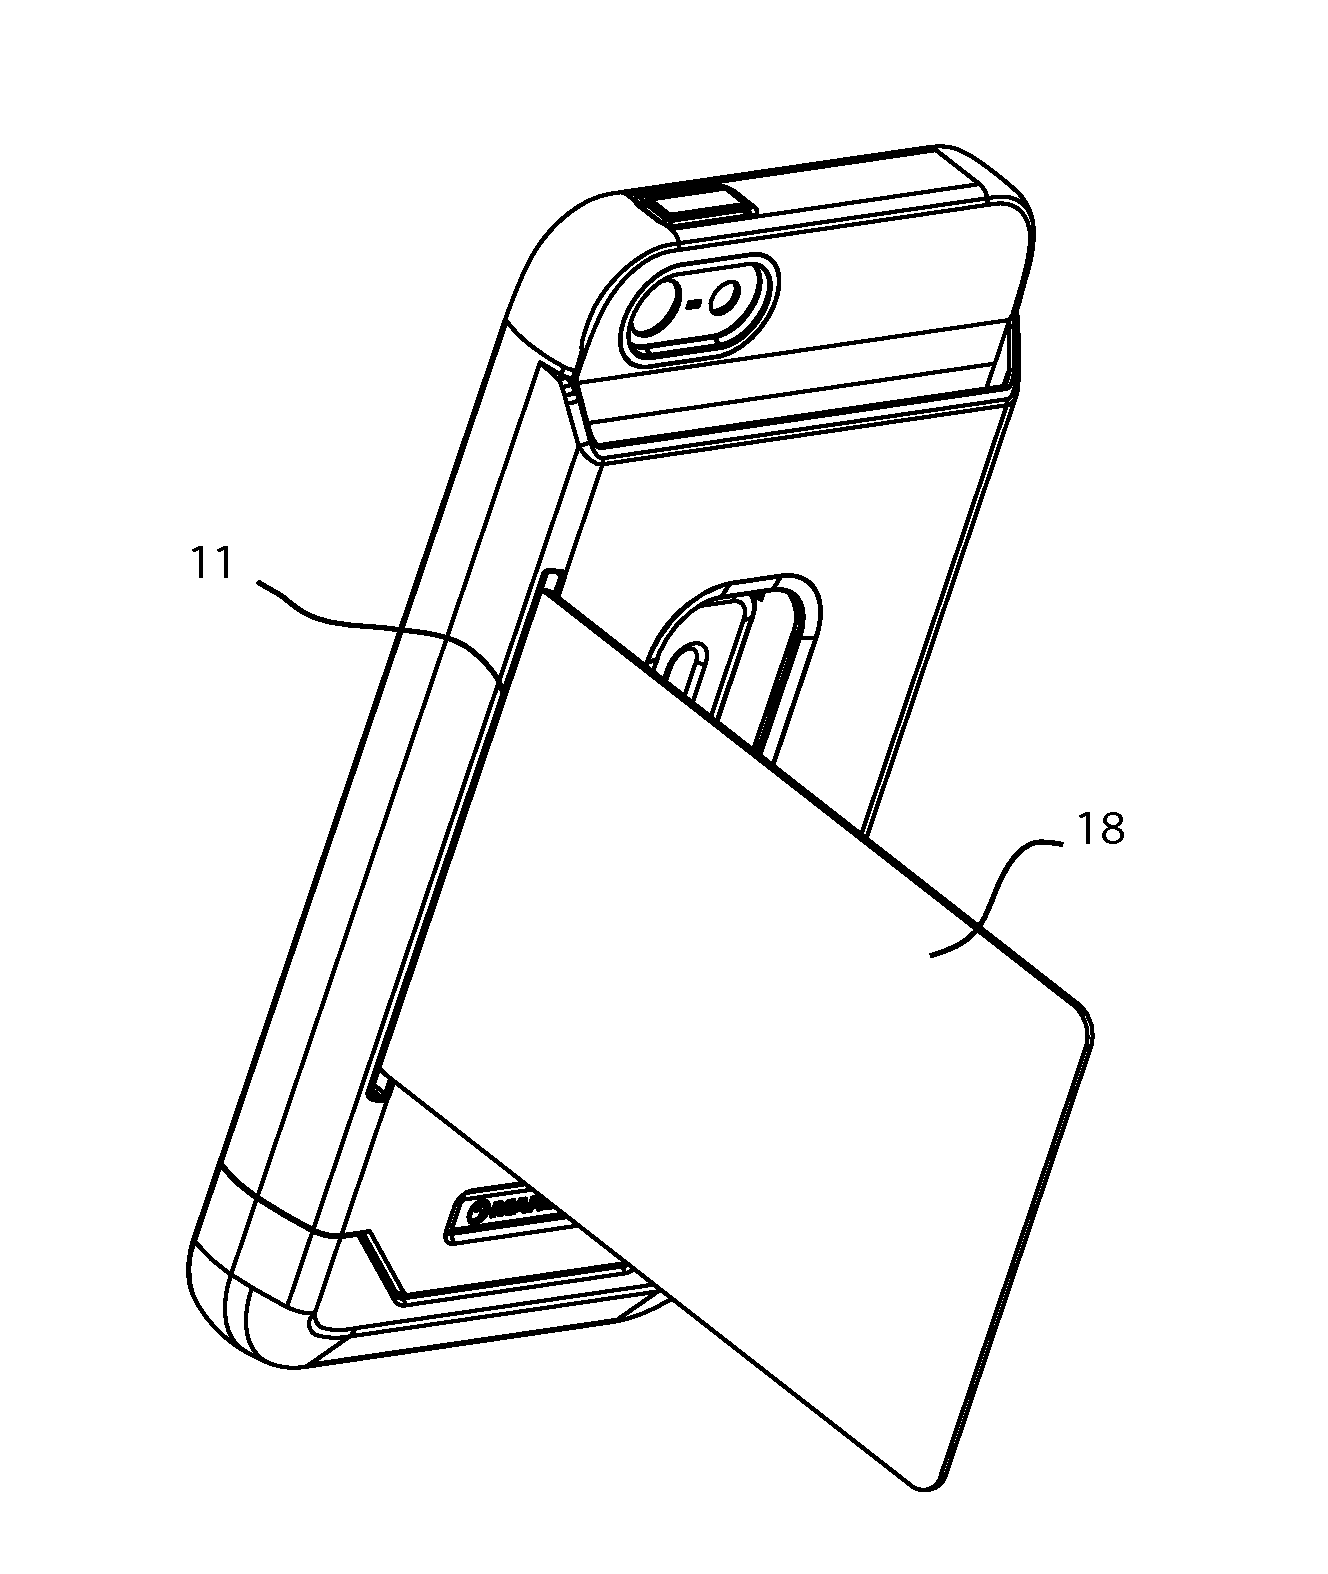 Smartphone case with charge card pocket and stand-up support facility